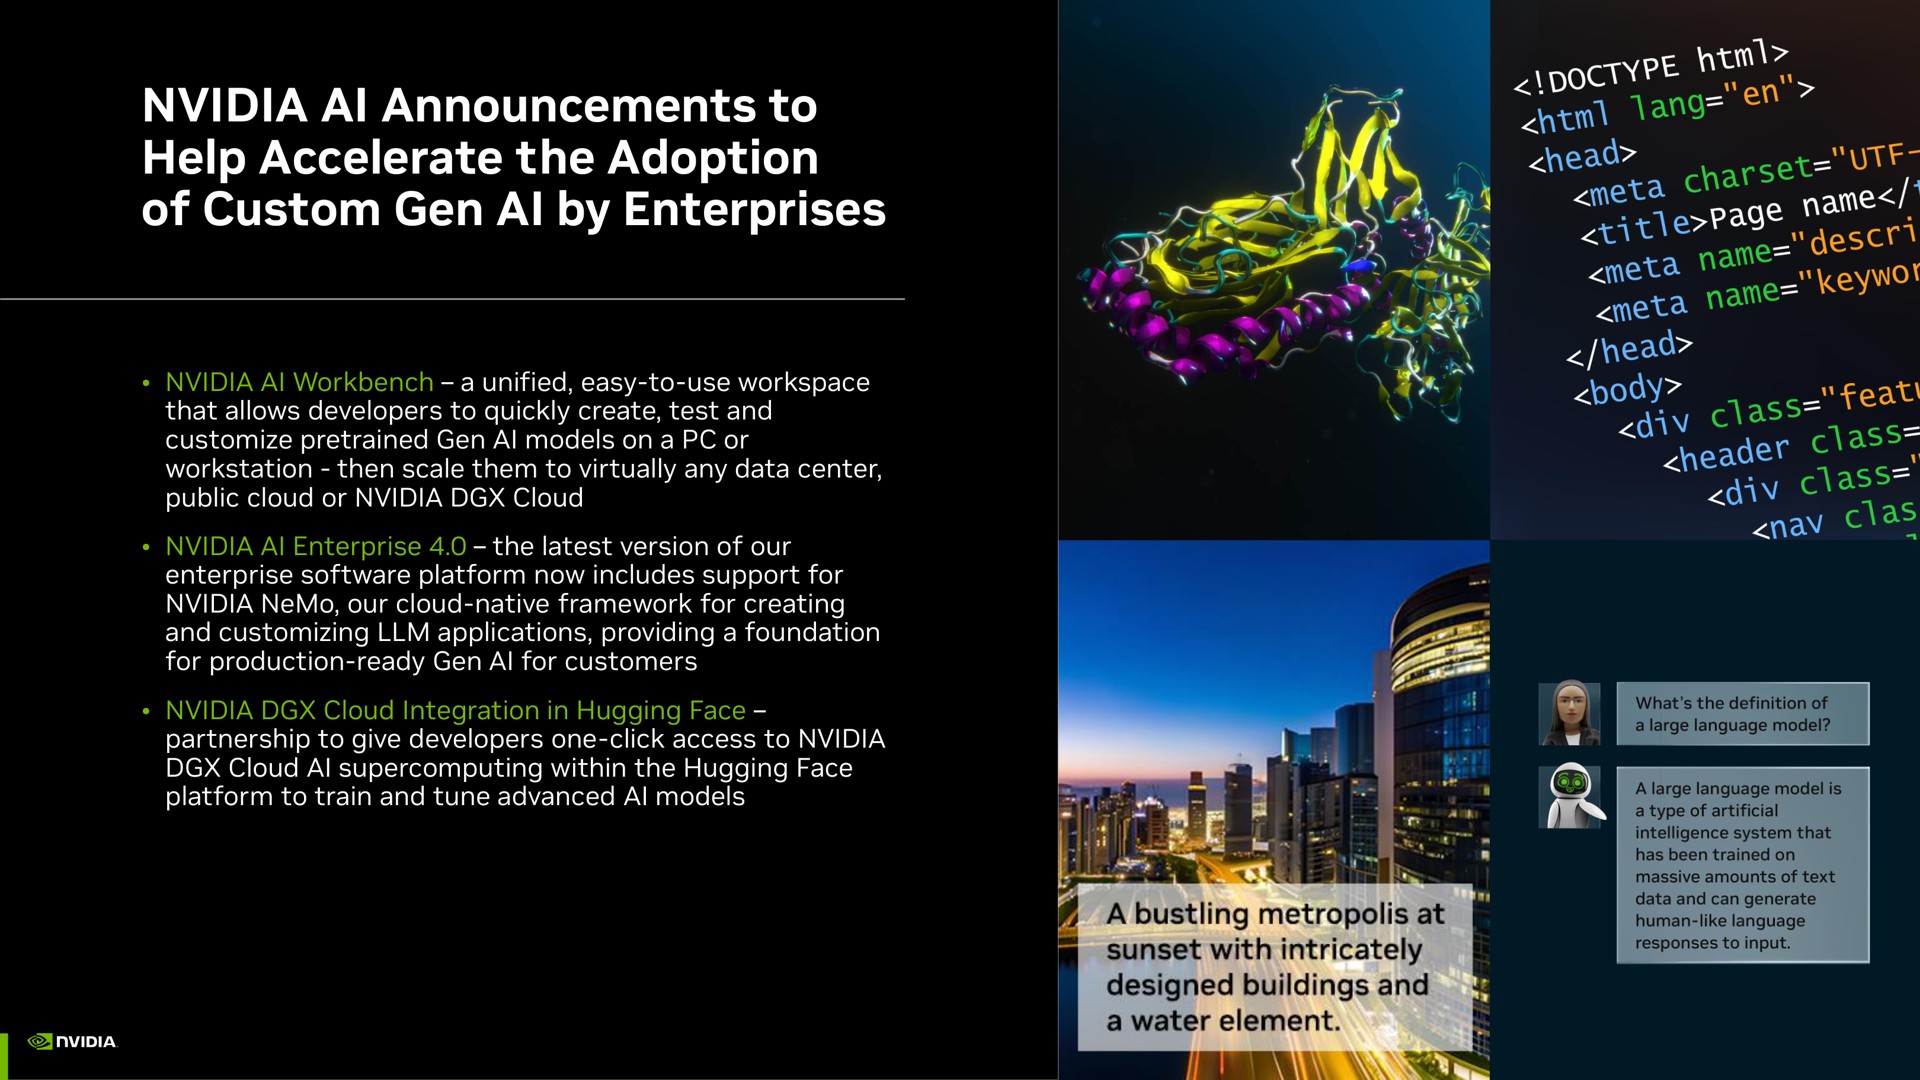 announcements to help accelerate the adoption of custom gen by enterprises | NVIDIA